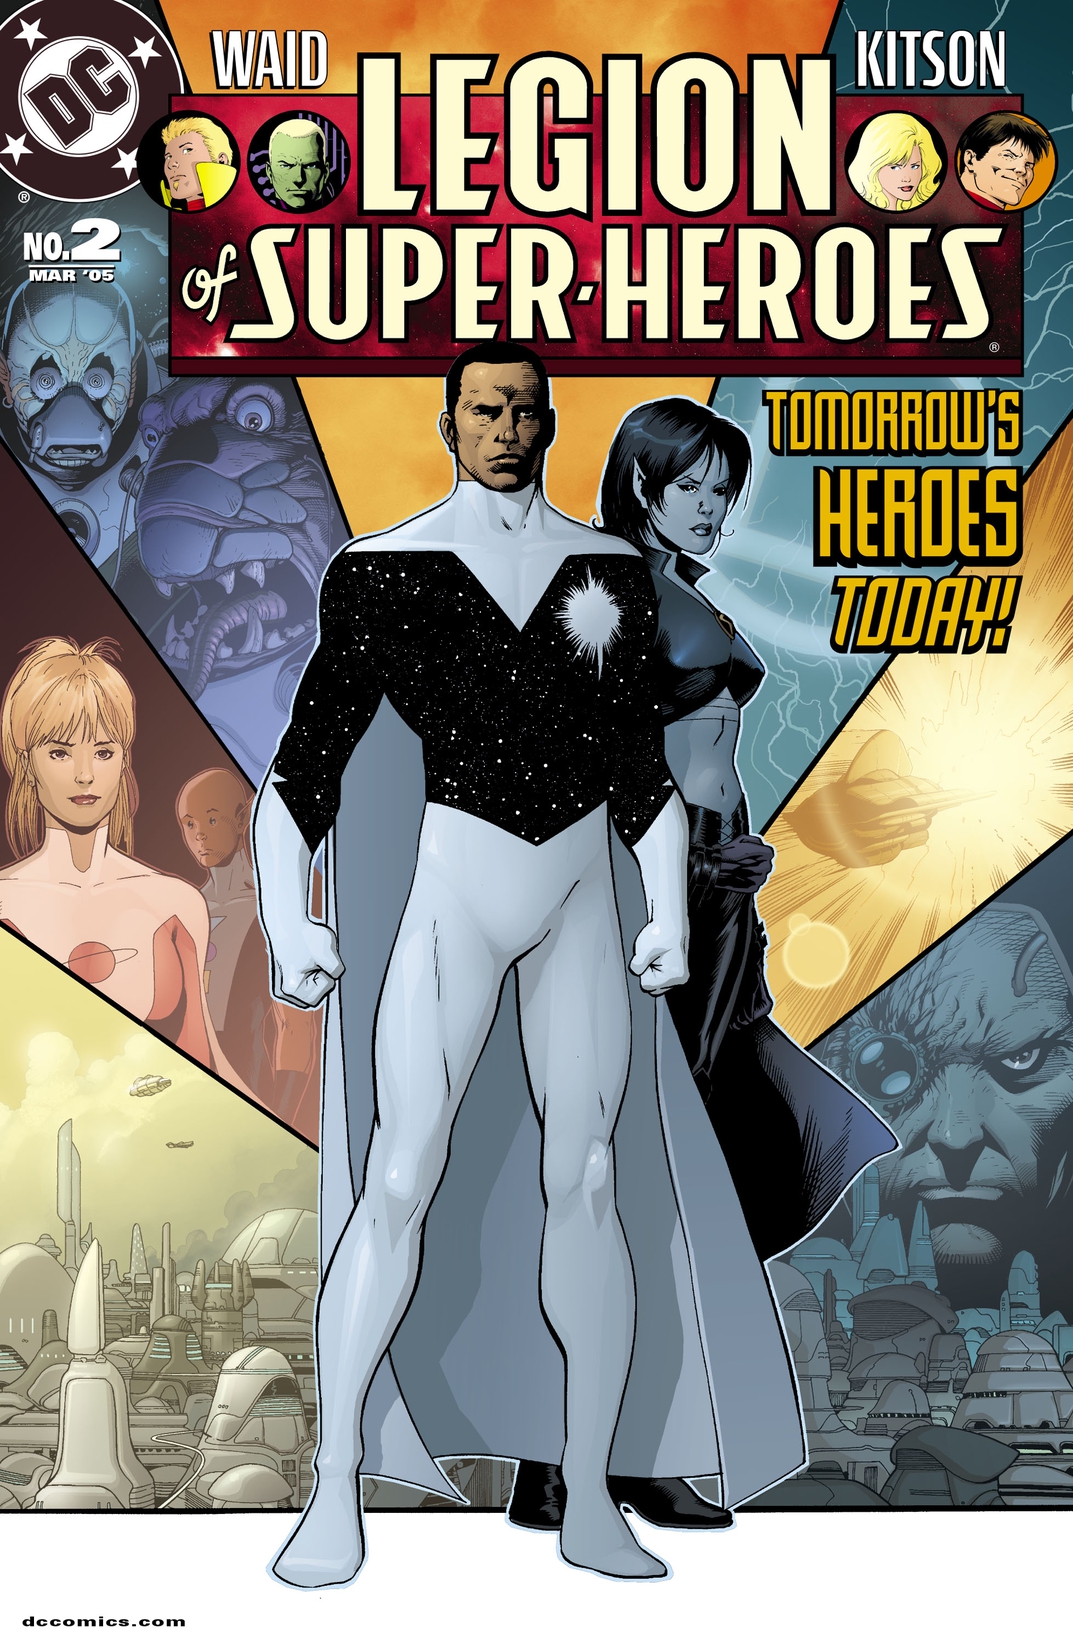 Legion of Super Heroes (2004-) #2 preview images